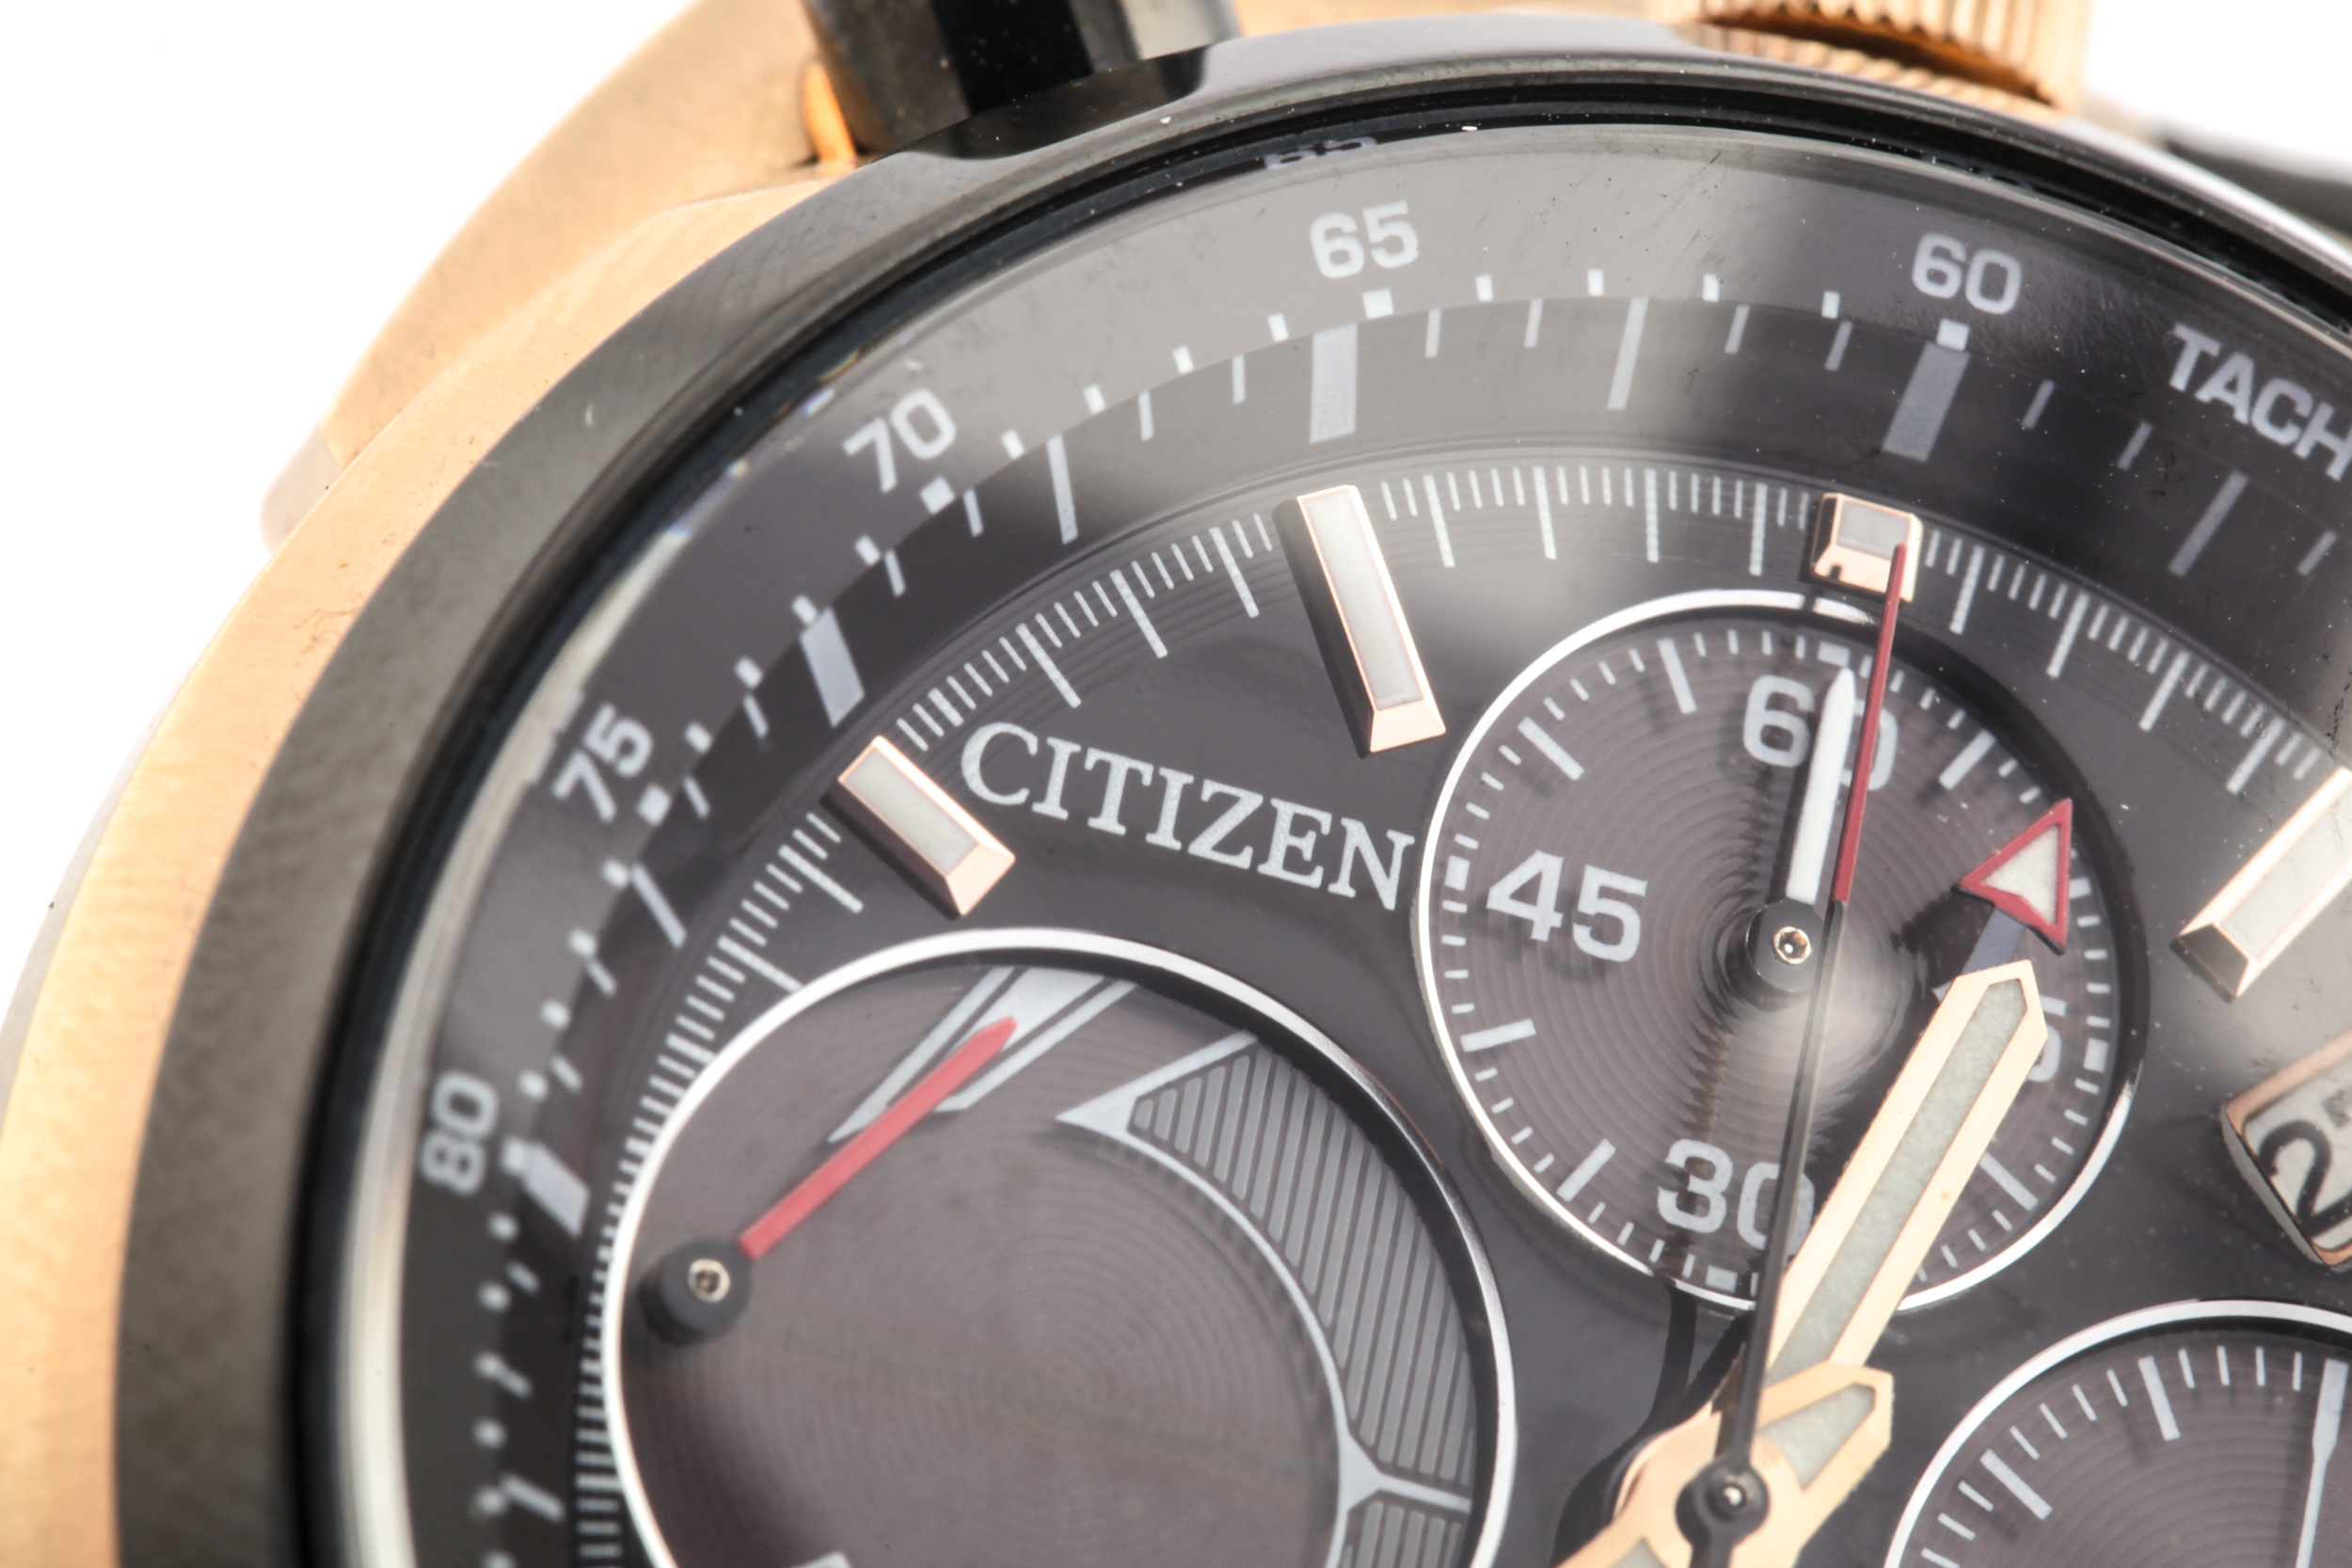 Citizen, Eco-Drive Promaster Bullhead, a gentleman's bracelet watch. Limited Edition no 1460/1973. - Image 2 of 7